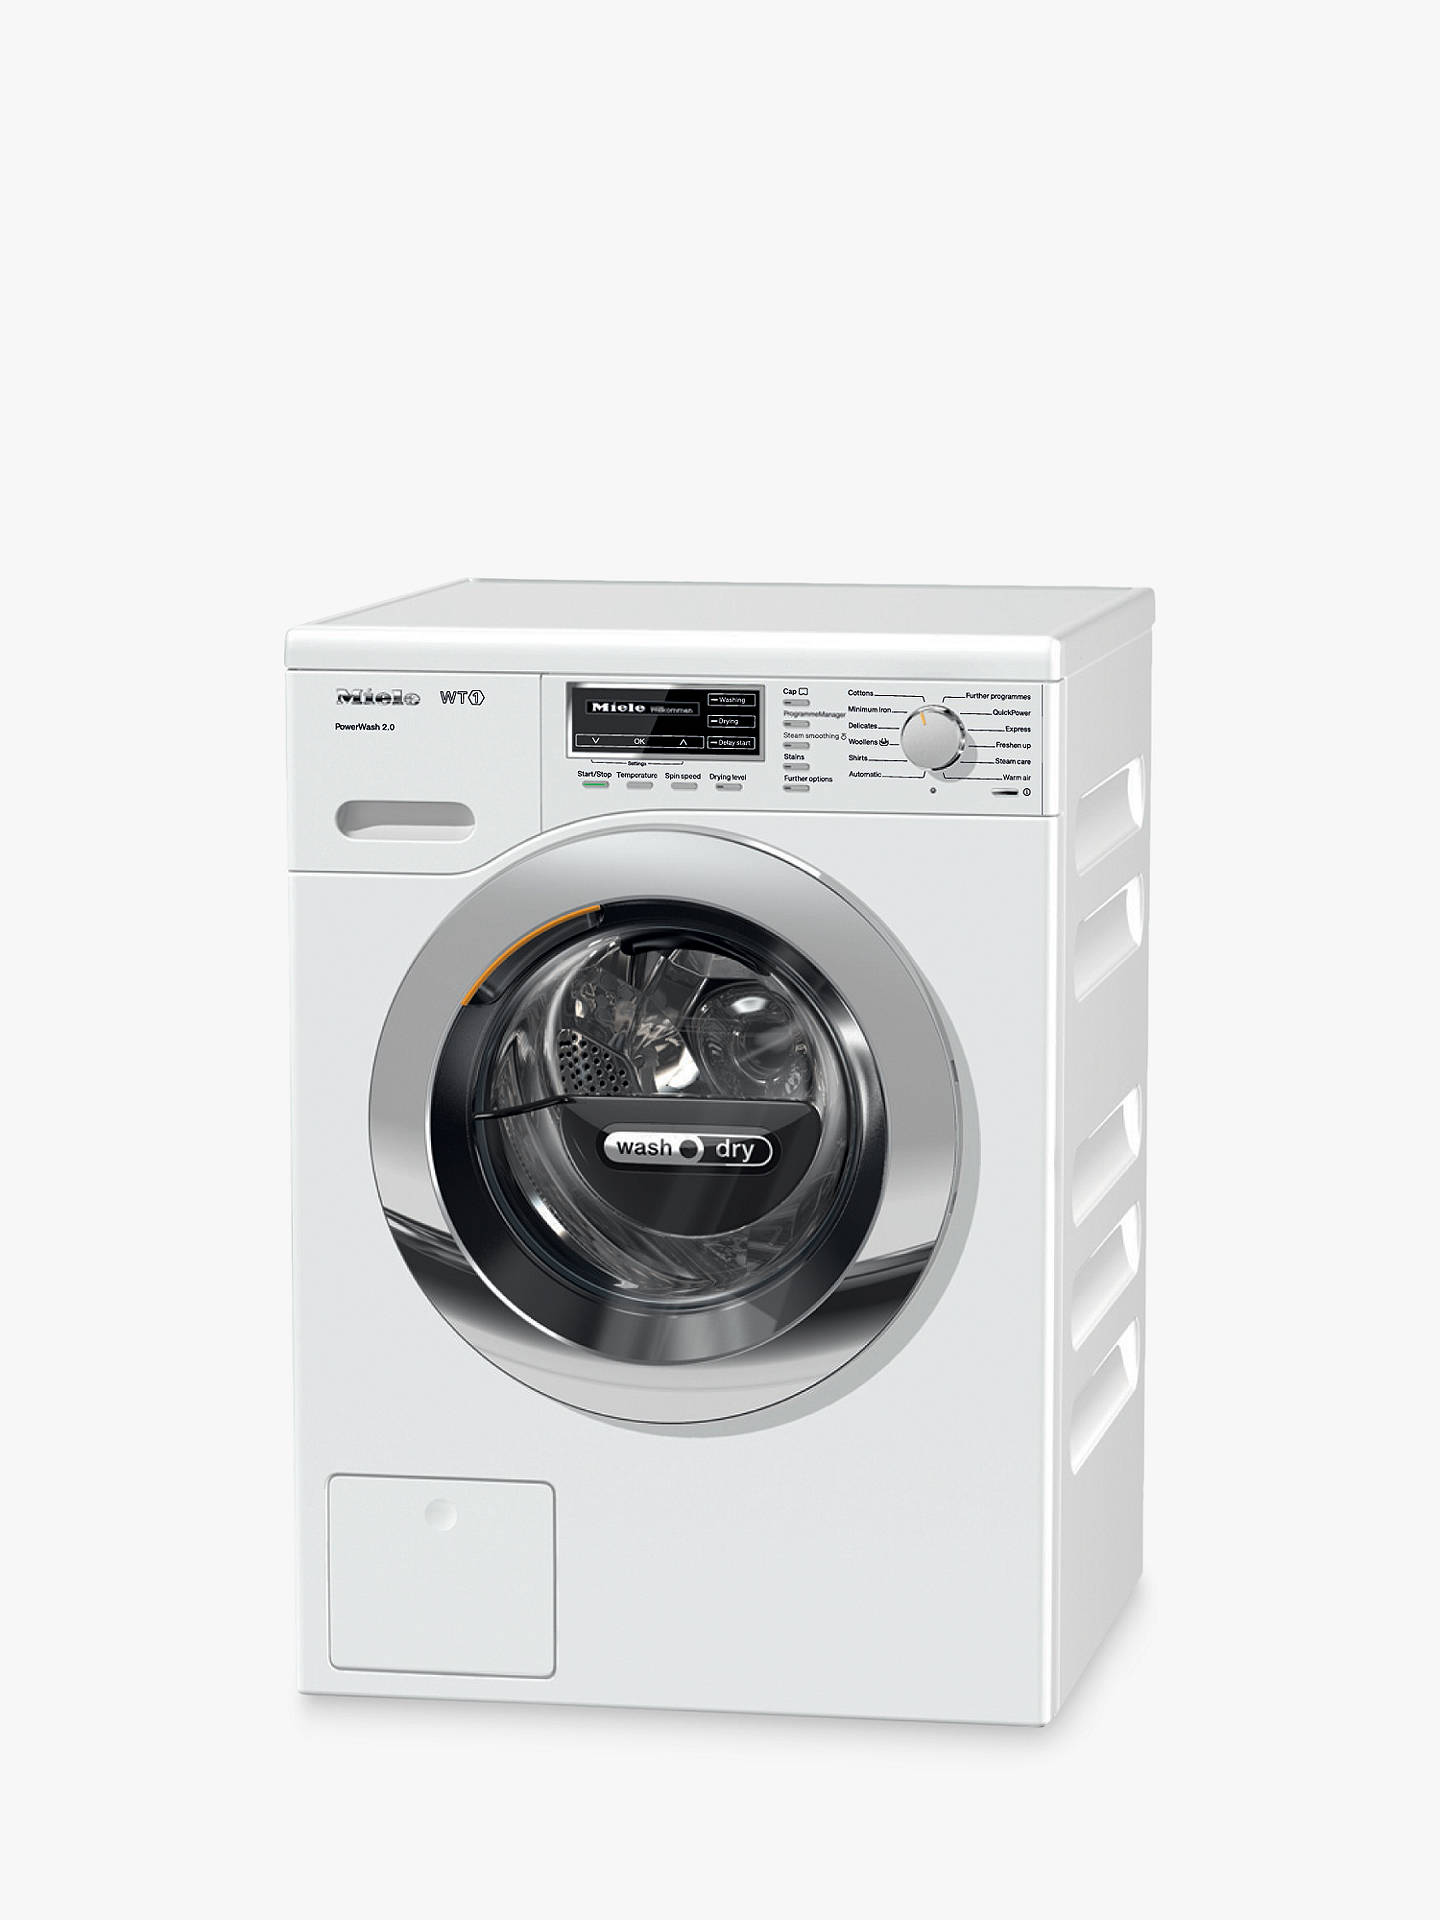 miele-wtf121wpm-washer-dryer-7kg-wash-5kg-dry-load-a-energy-rating